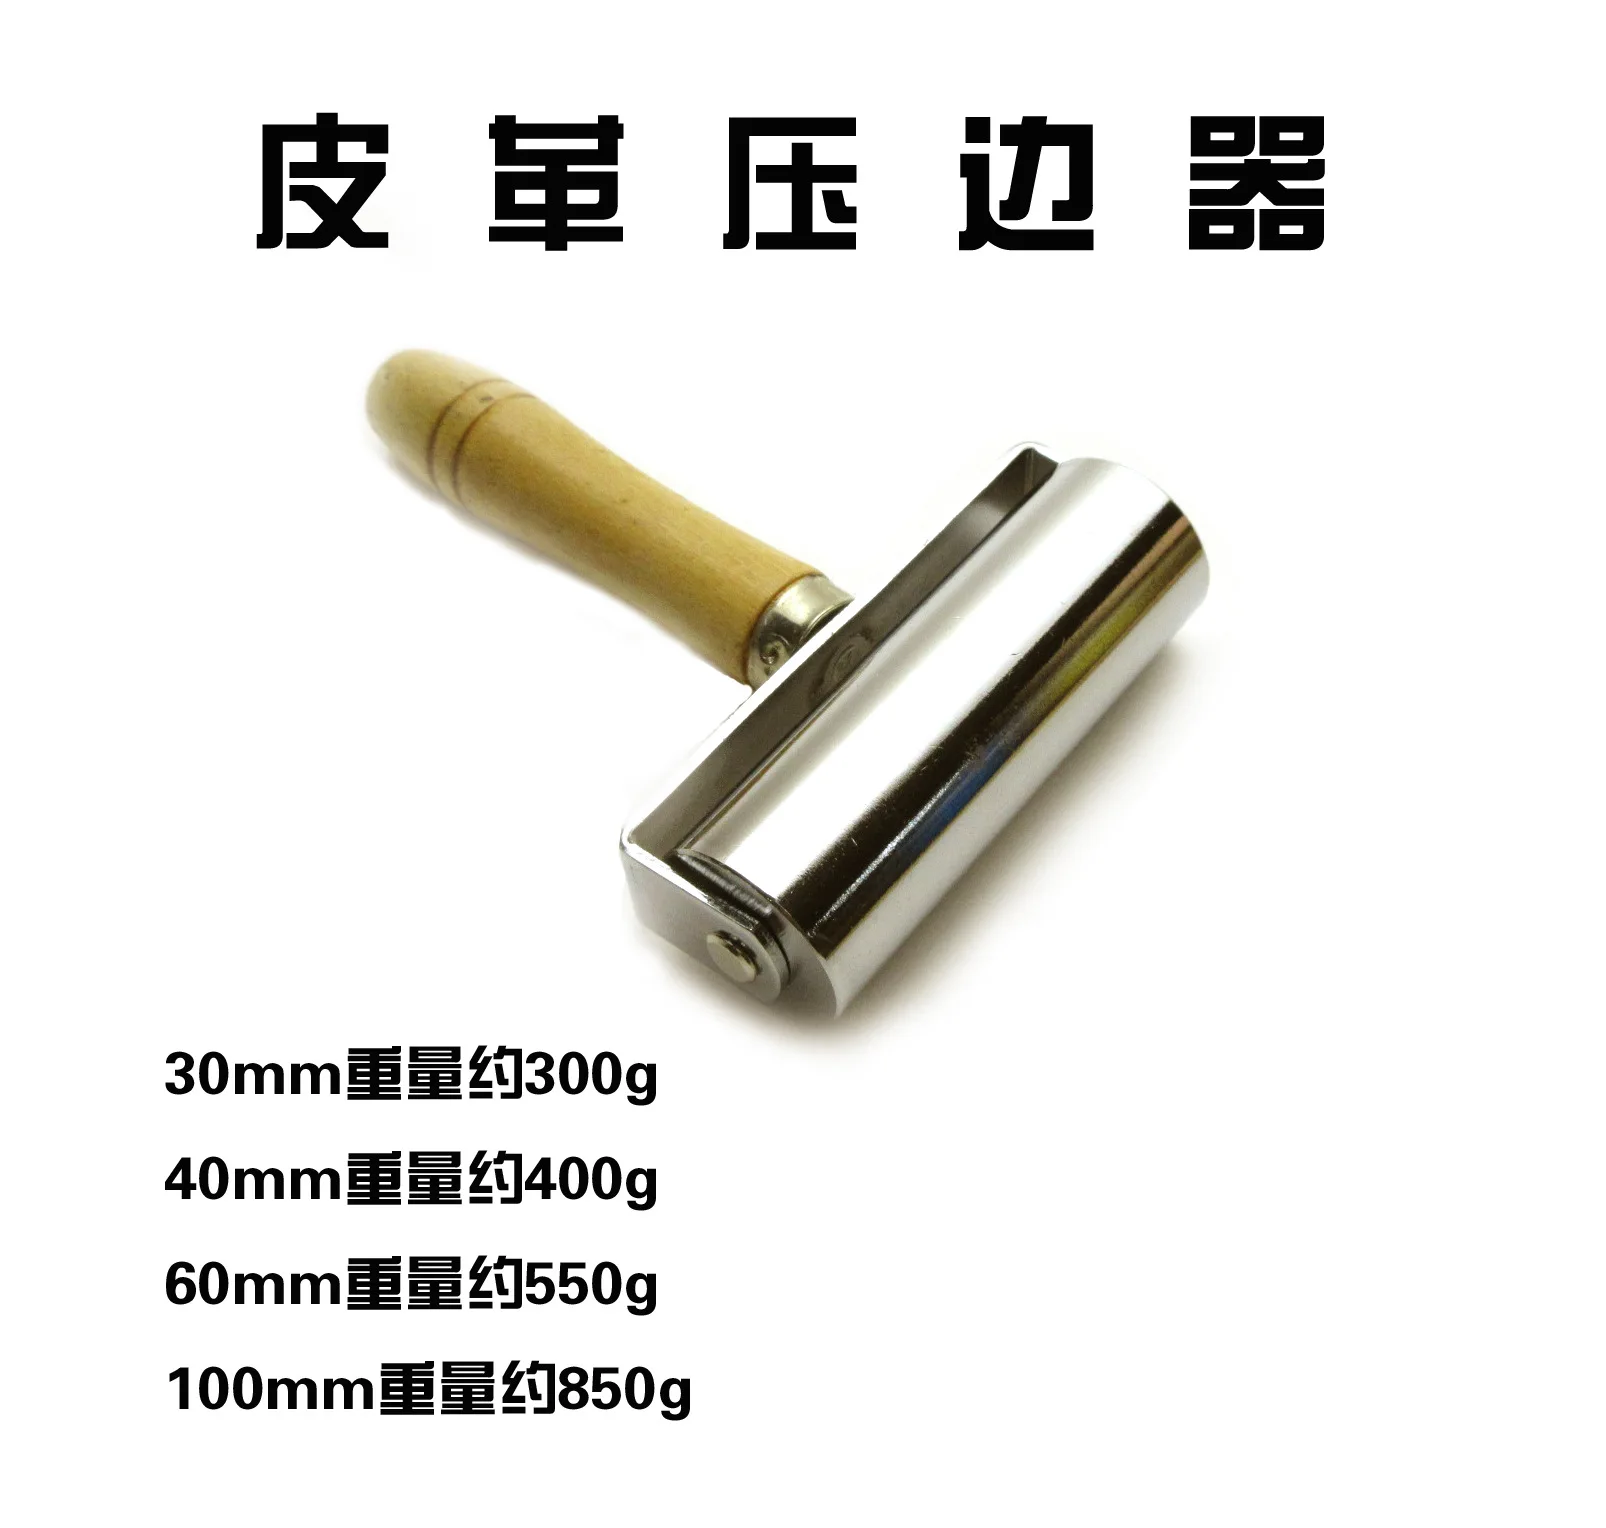 GS Stainless Steel Flat Pressure Roller Wallpaper Apply Hand Tool With Bearing Prevent Pry The Edge Of The Wallpaper